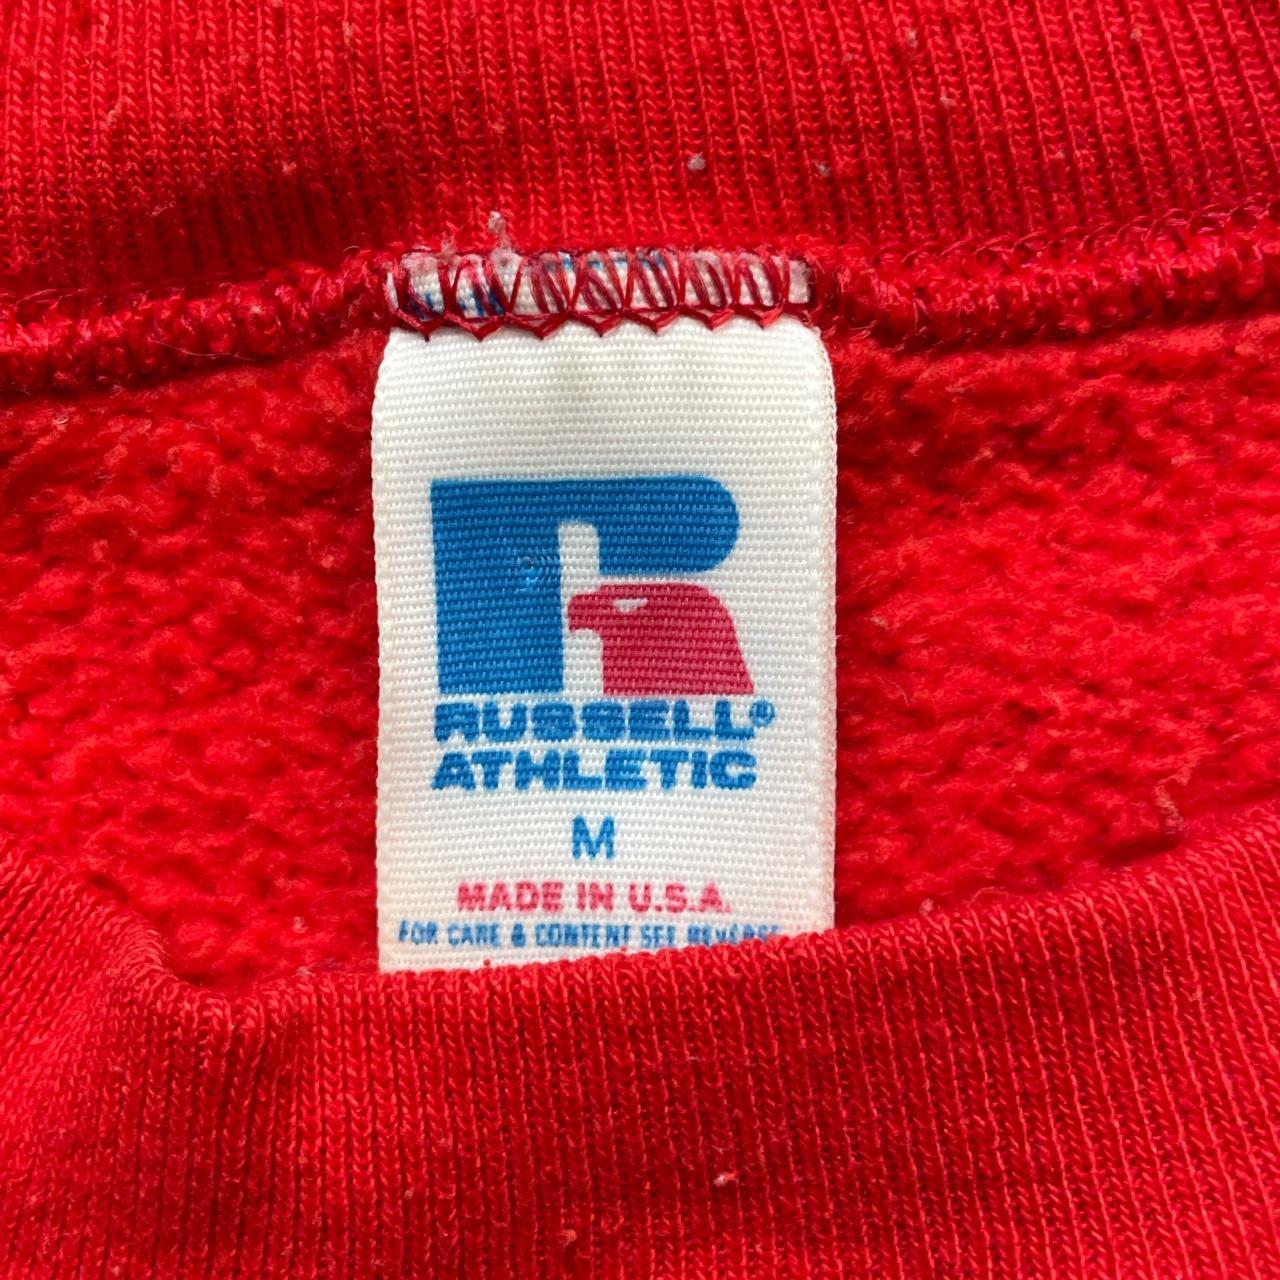 Vintage 1980s Crimson Red Russell Athletic Made in... - Depop